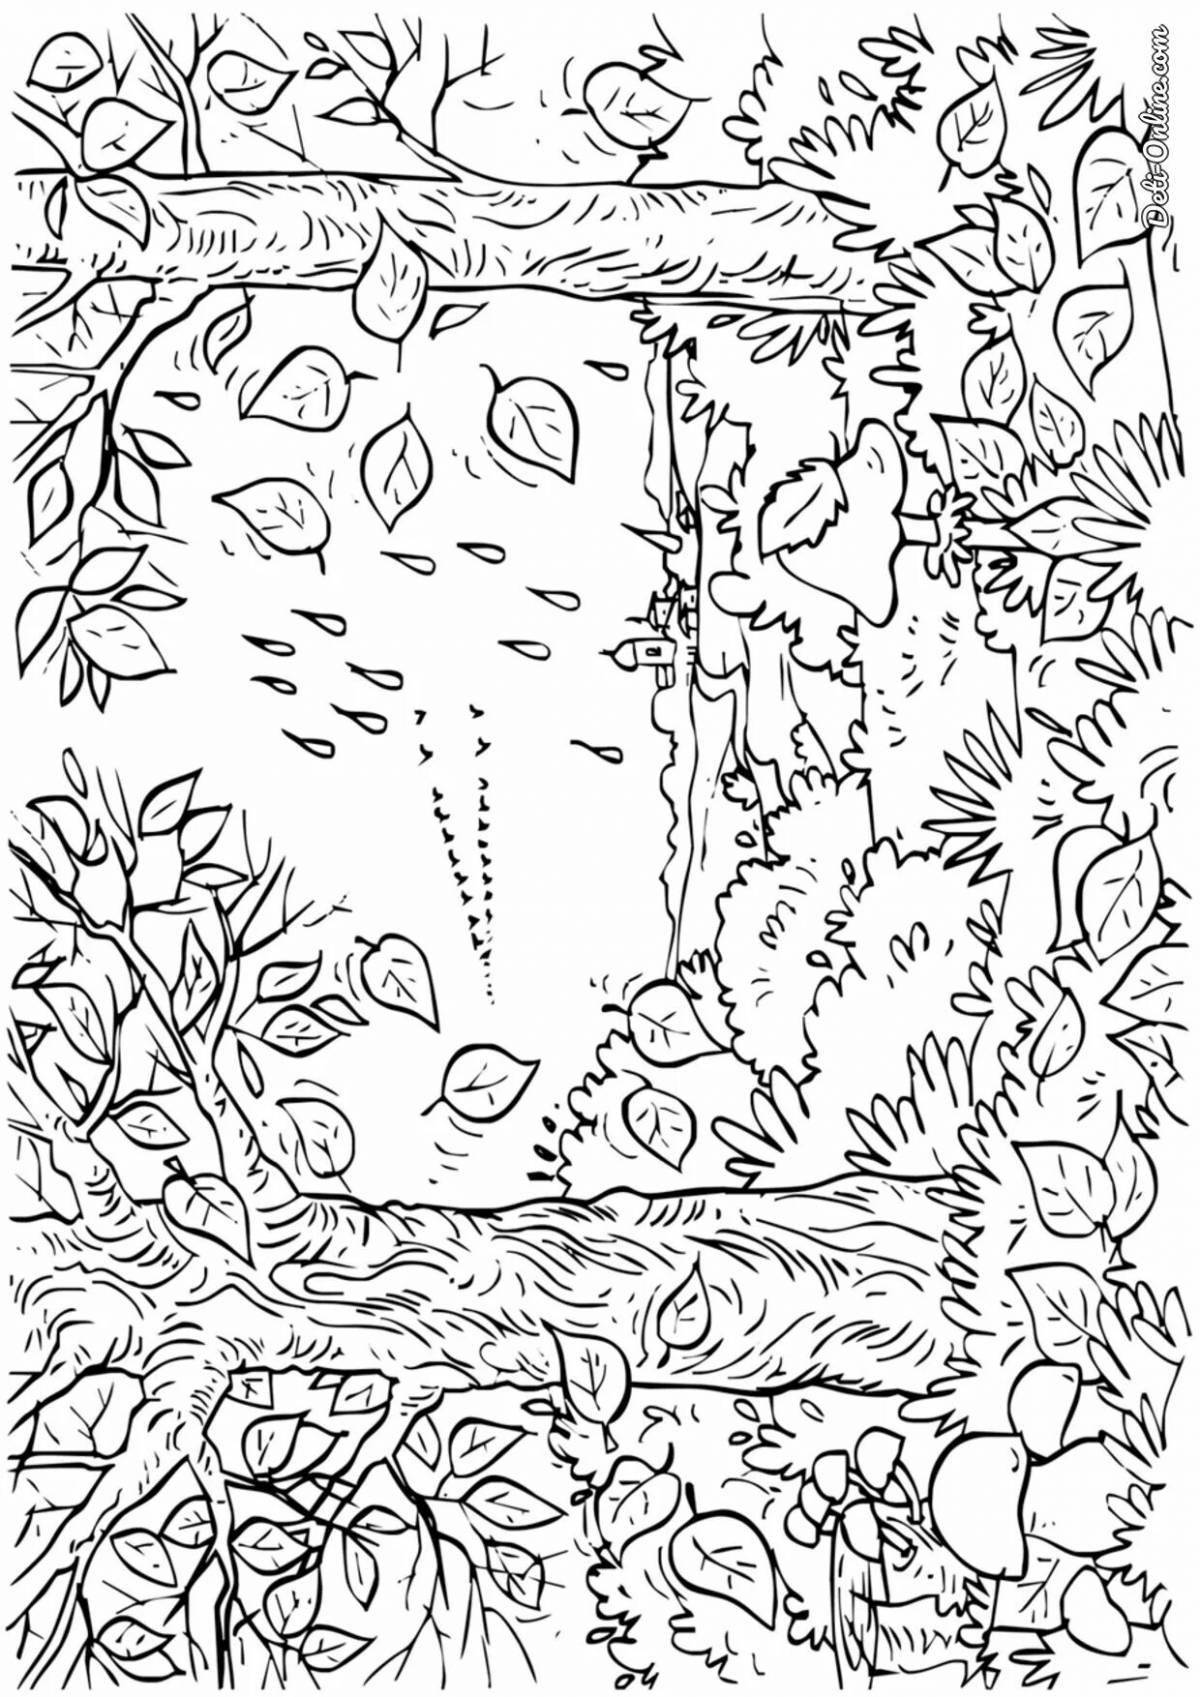 Coloring page idyllic autumn forest